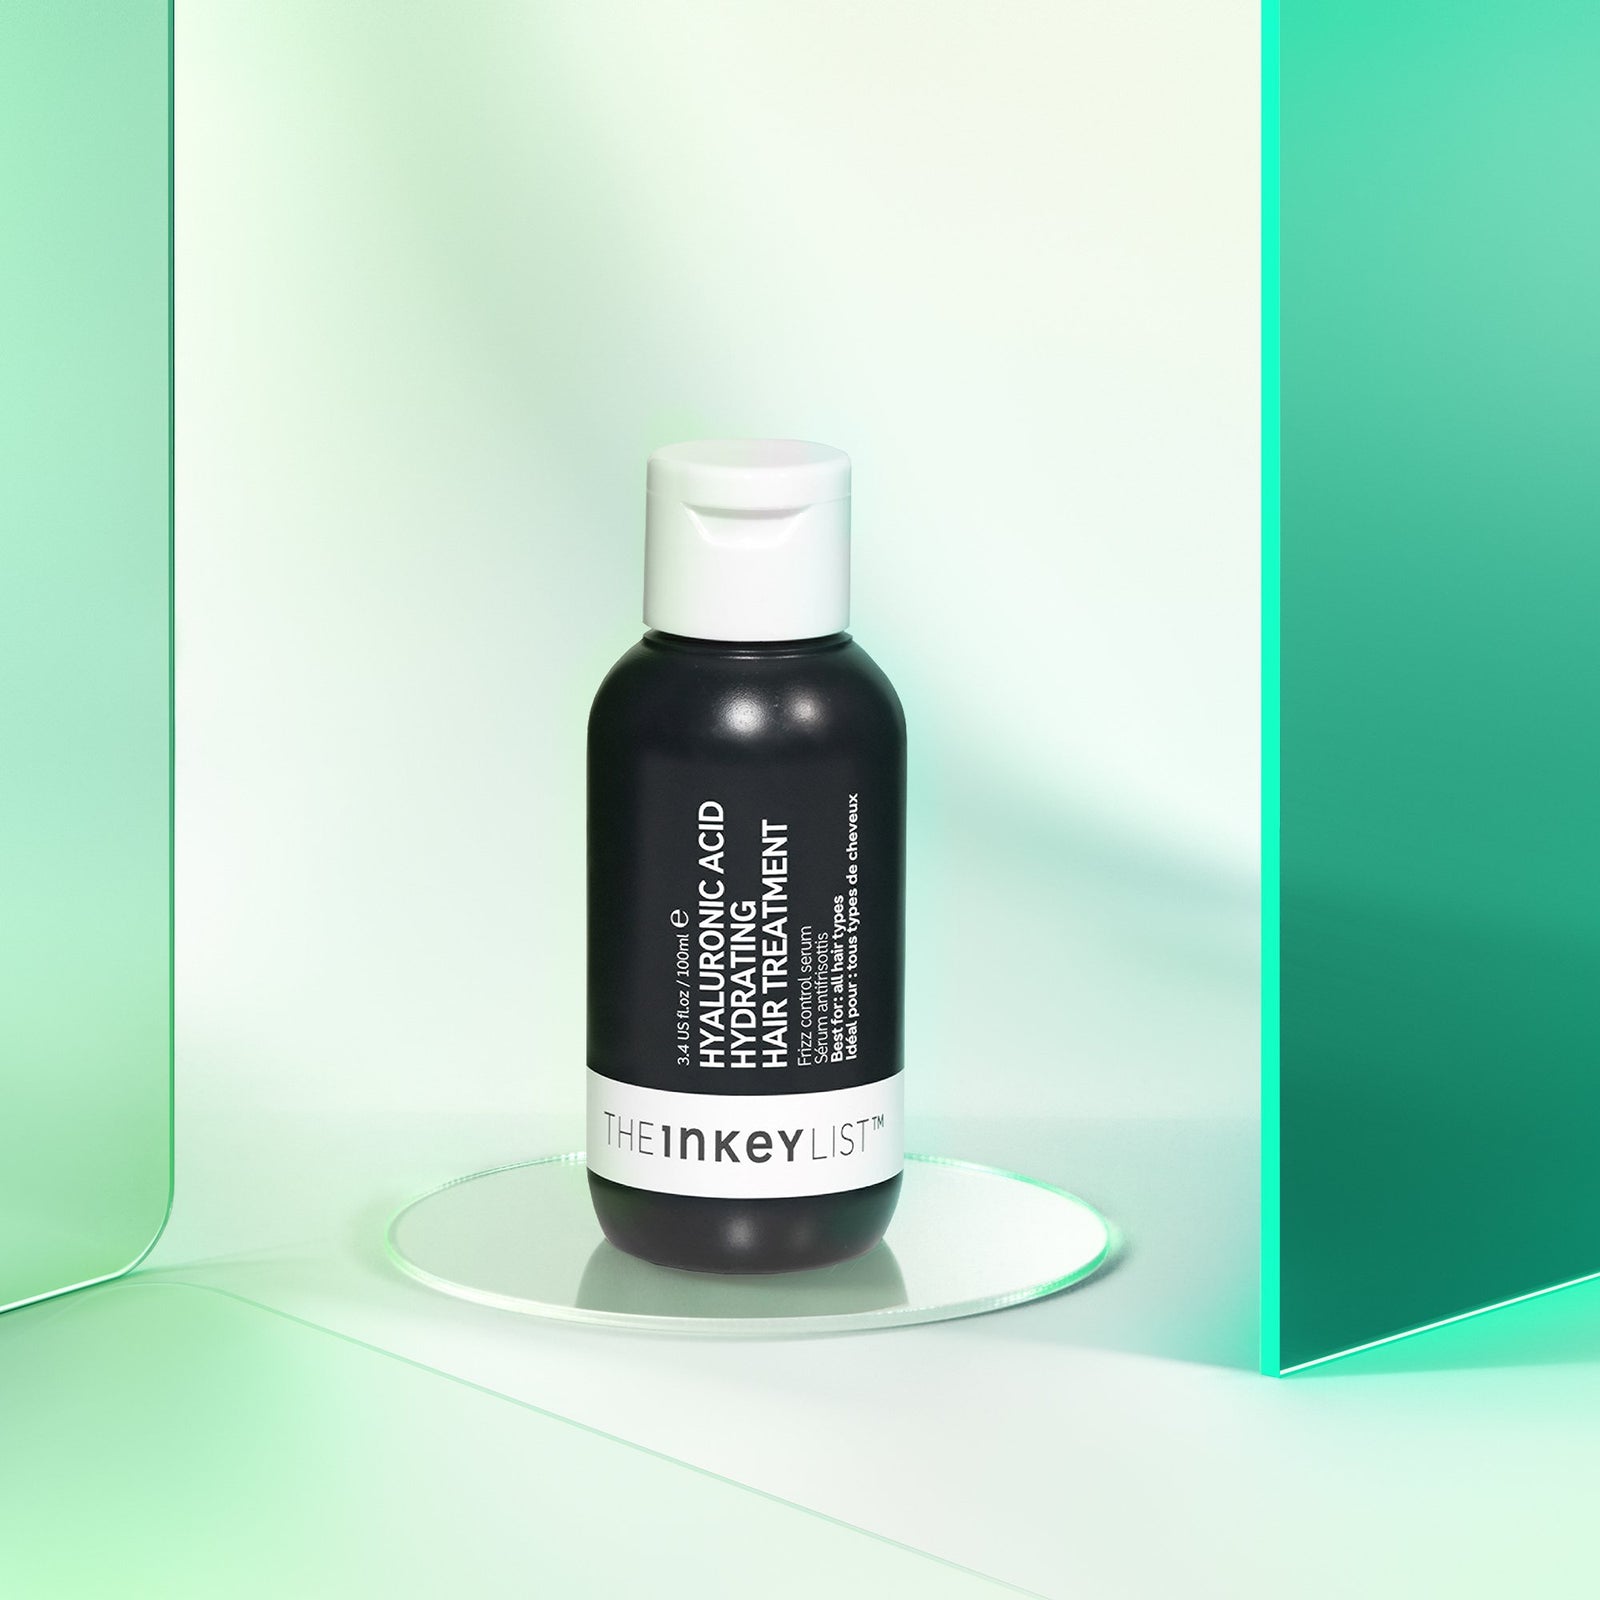 Hyaluronic Acid Hydrating Hair Treatment product against a green glossy background